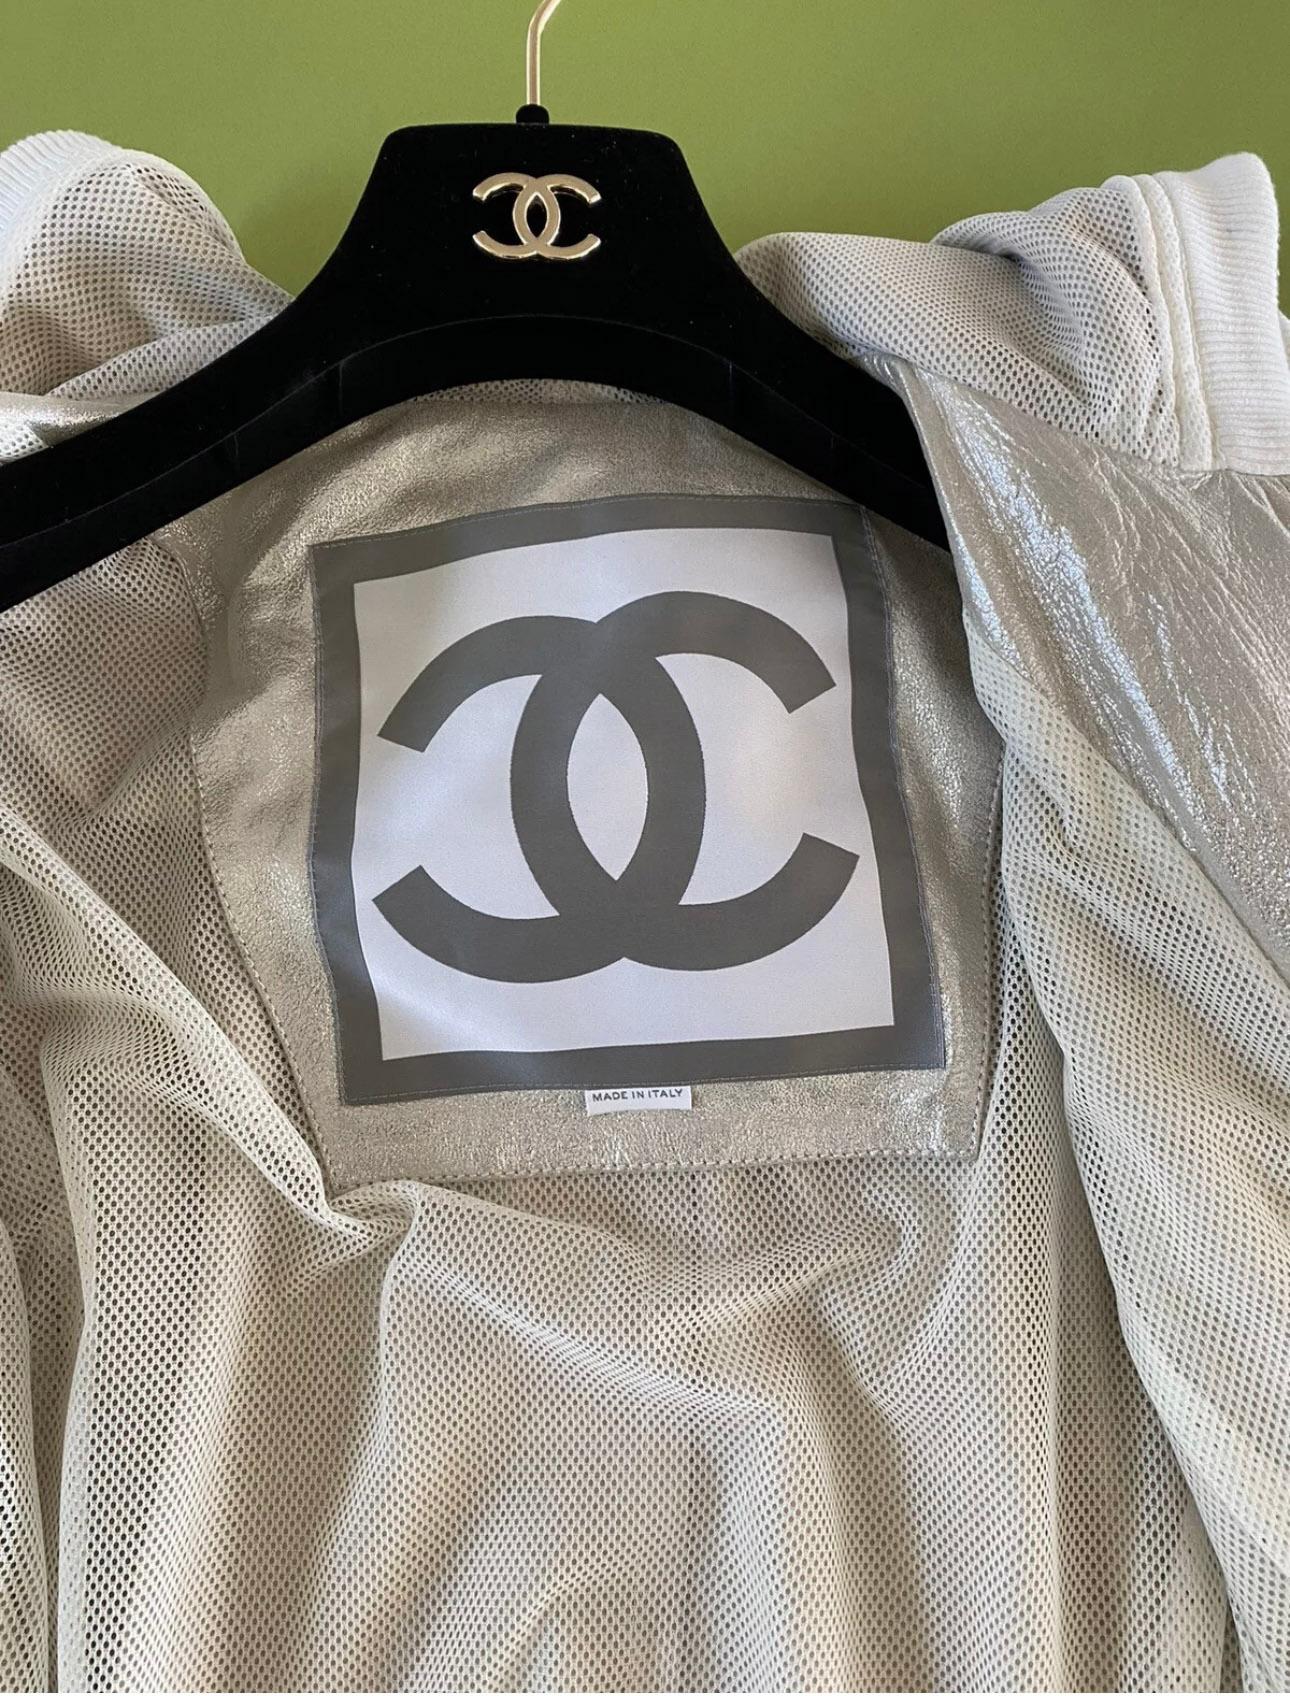 Chanel Champaign Metallic Leather Bomber Jacket For Sale 3